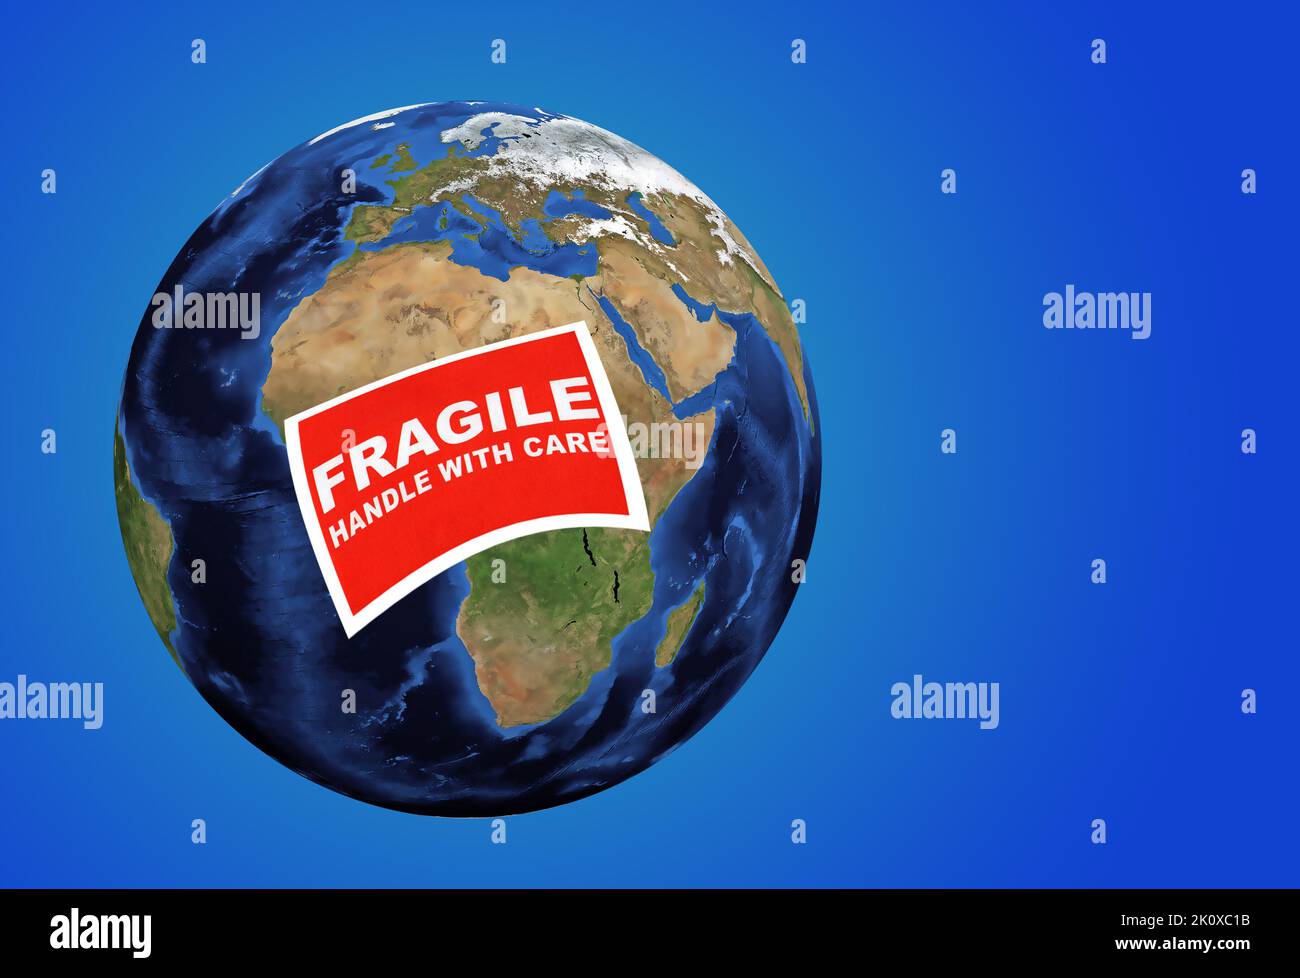 planet Earth with a fragile label over it, ecology concept Stock Photo